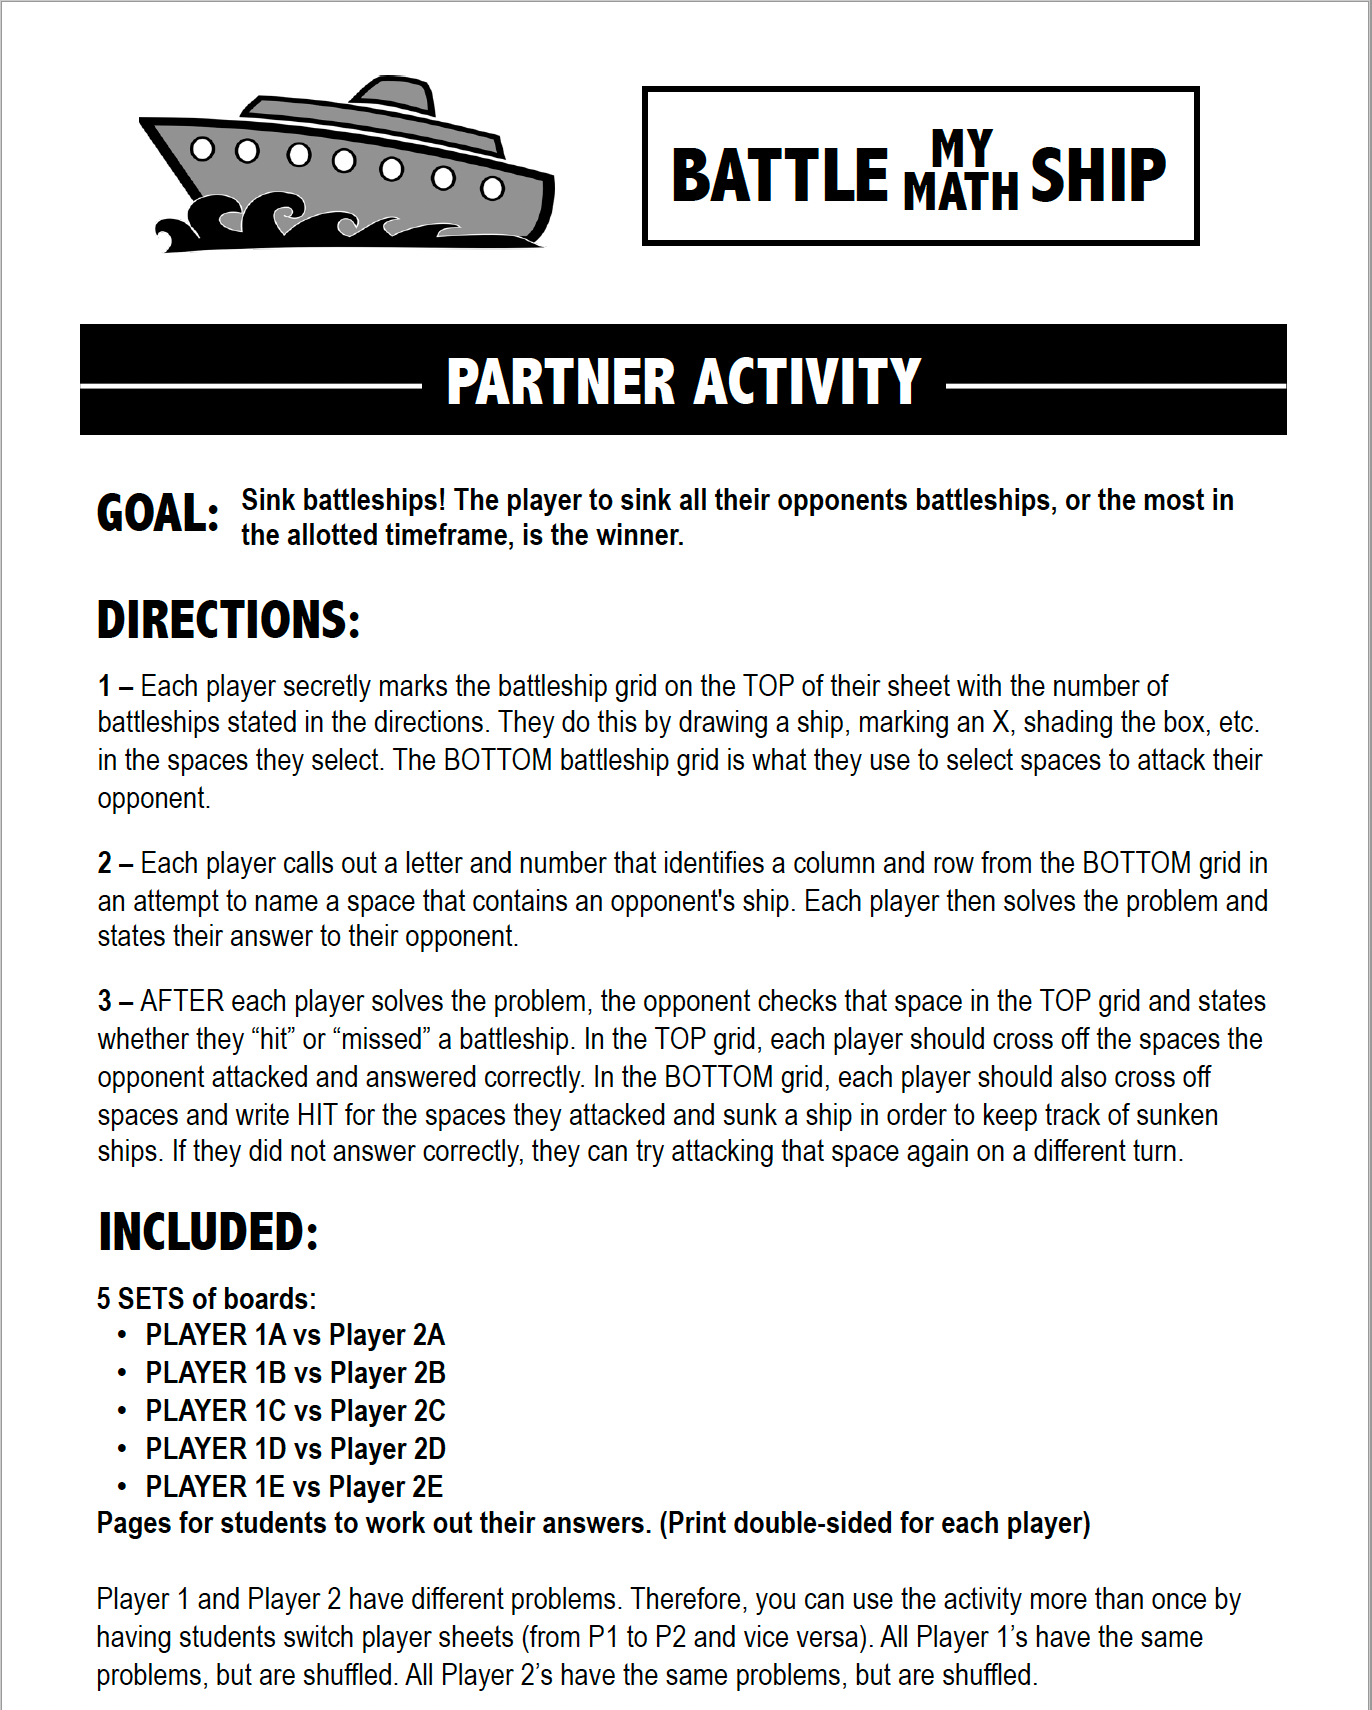 Converting Fractions to Percent Activity | Battle My Math Ship Game